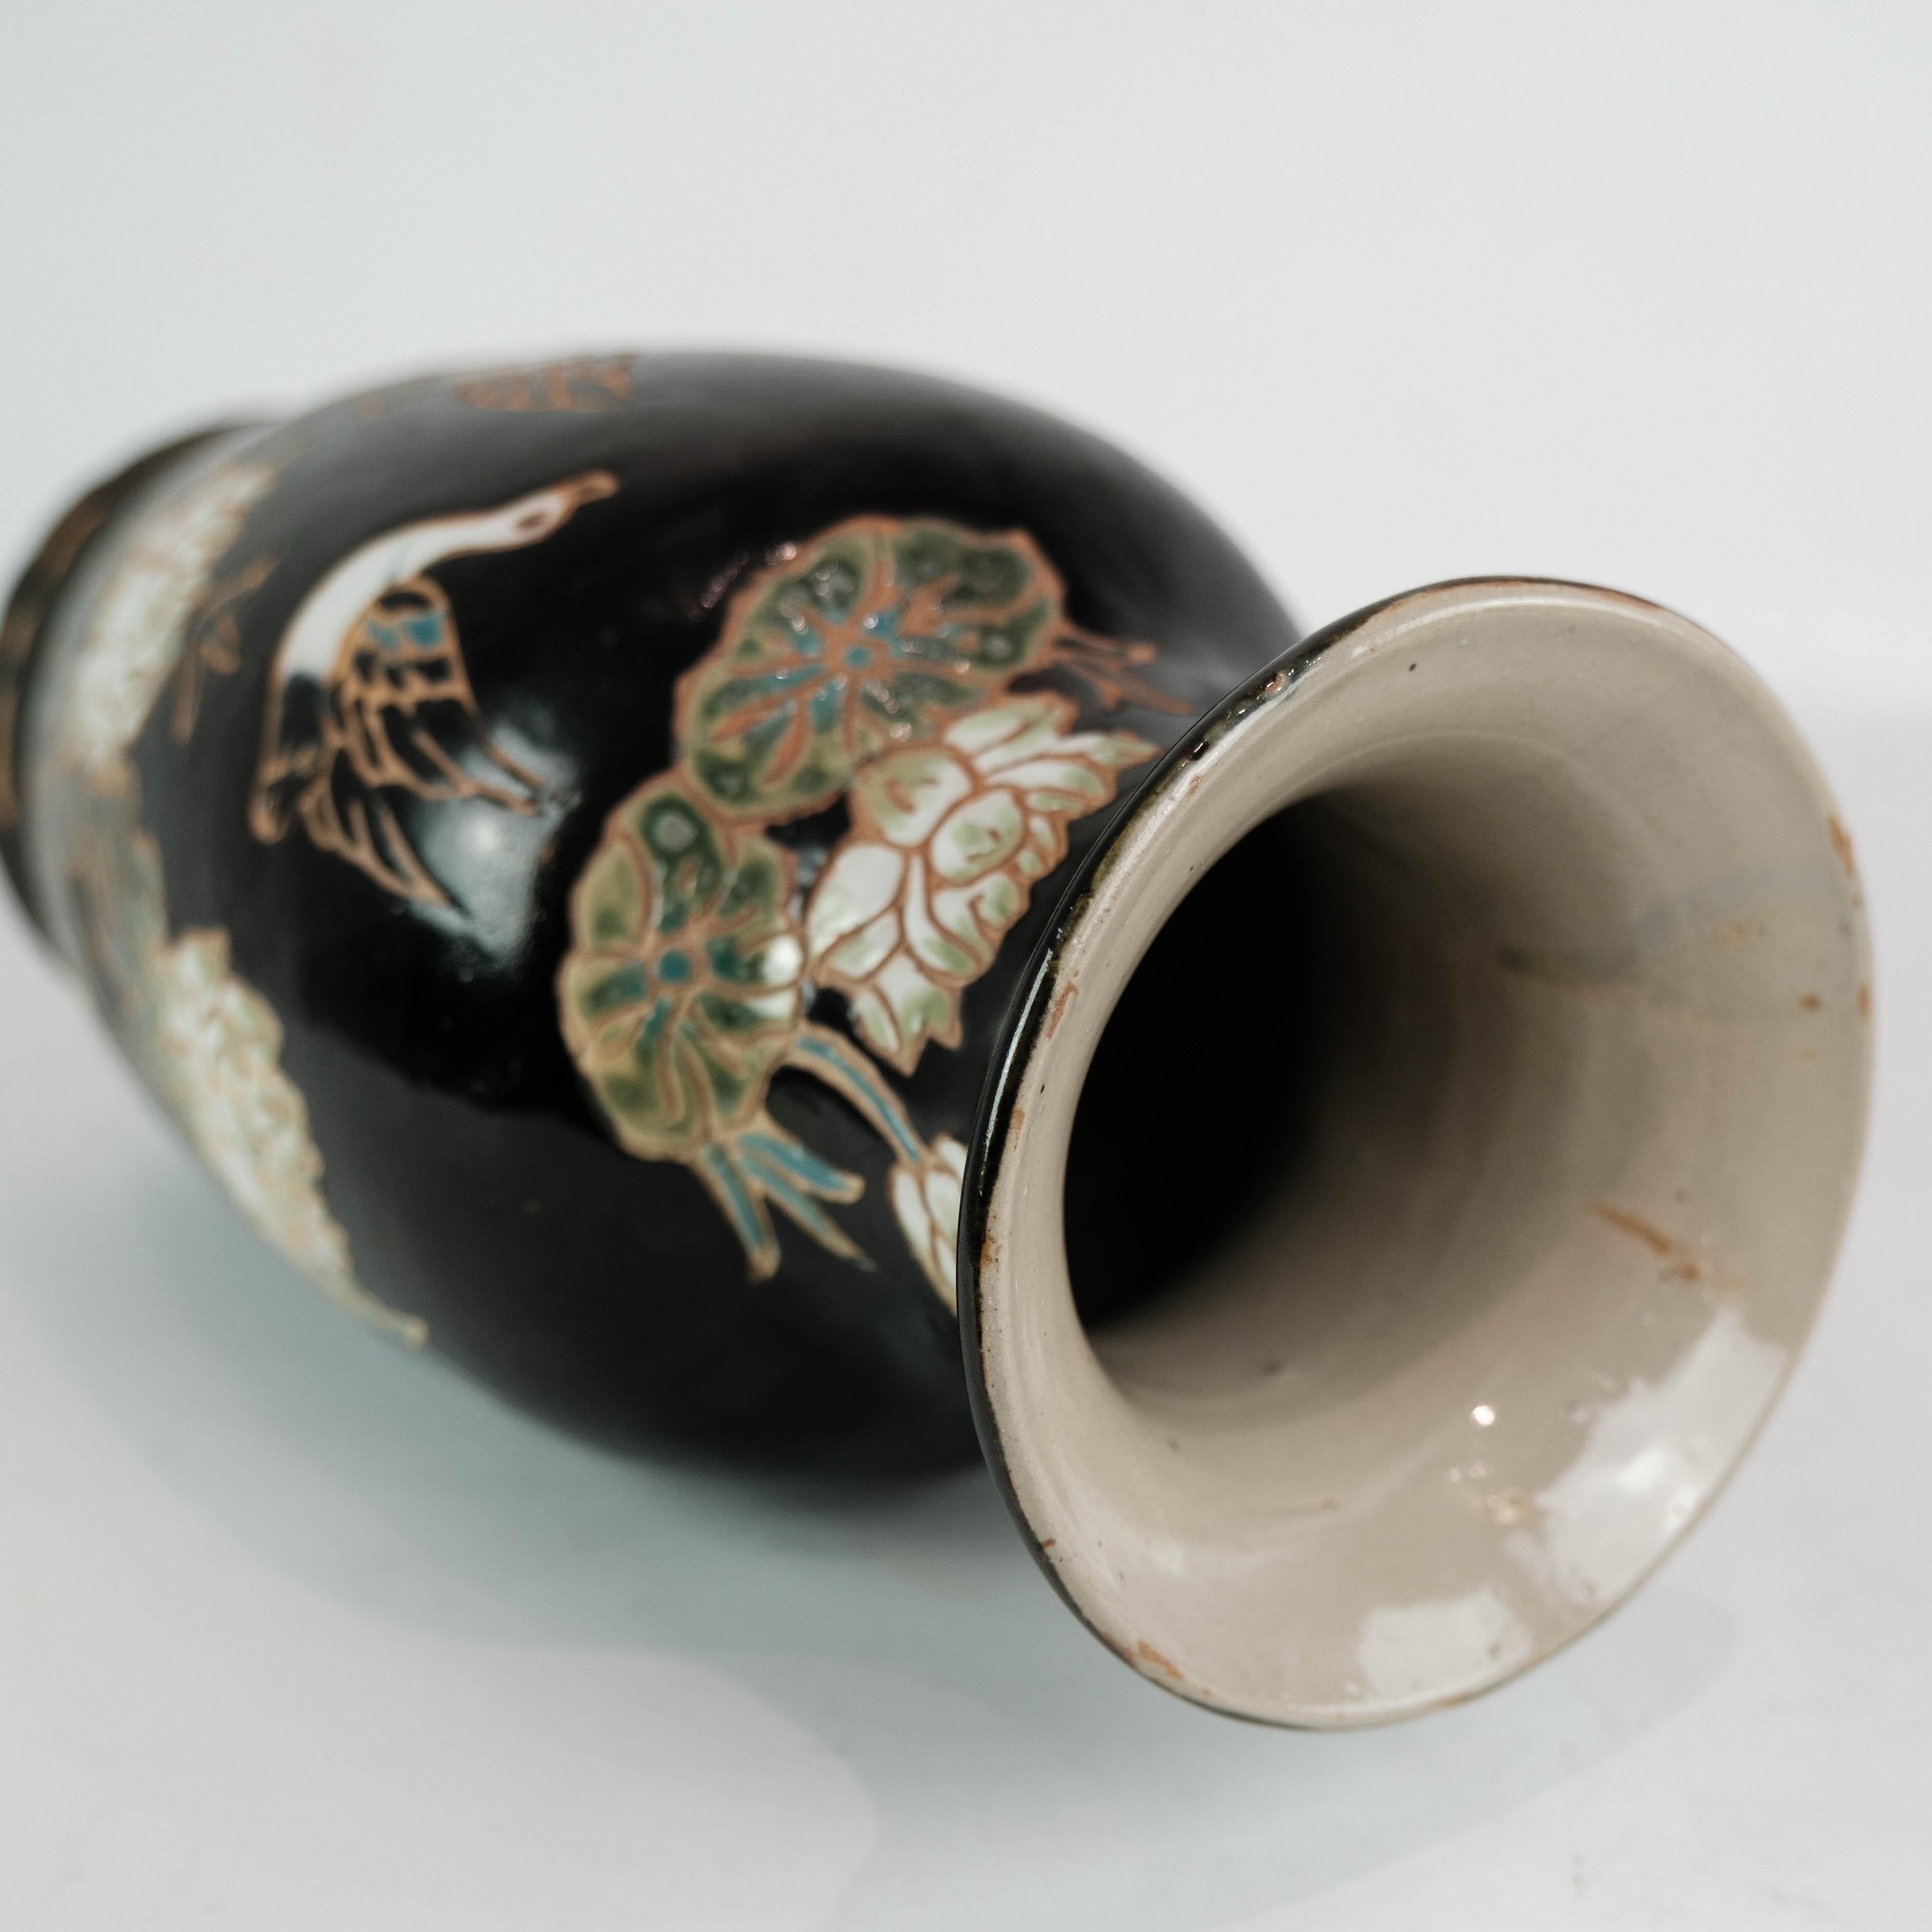 Mid-20th Century Ceramic Vase With Black Glaze & Decorated With Flowers From 1960s For Sale